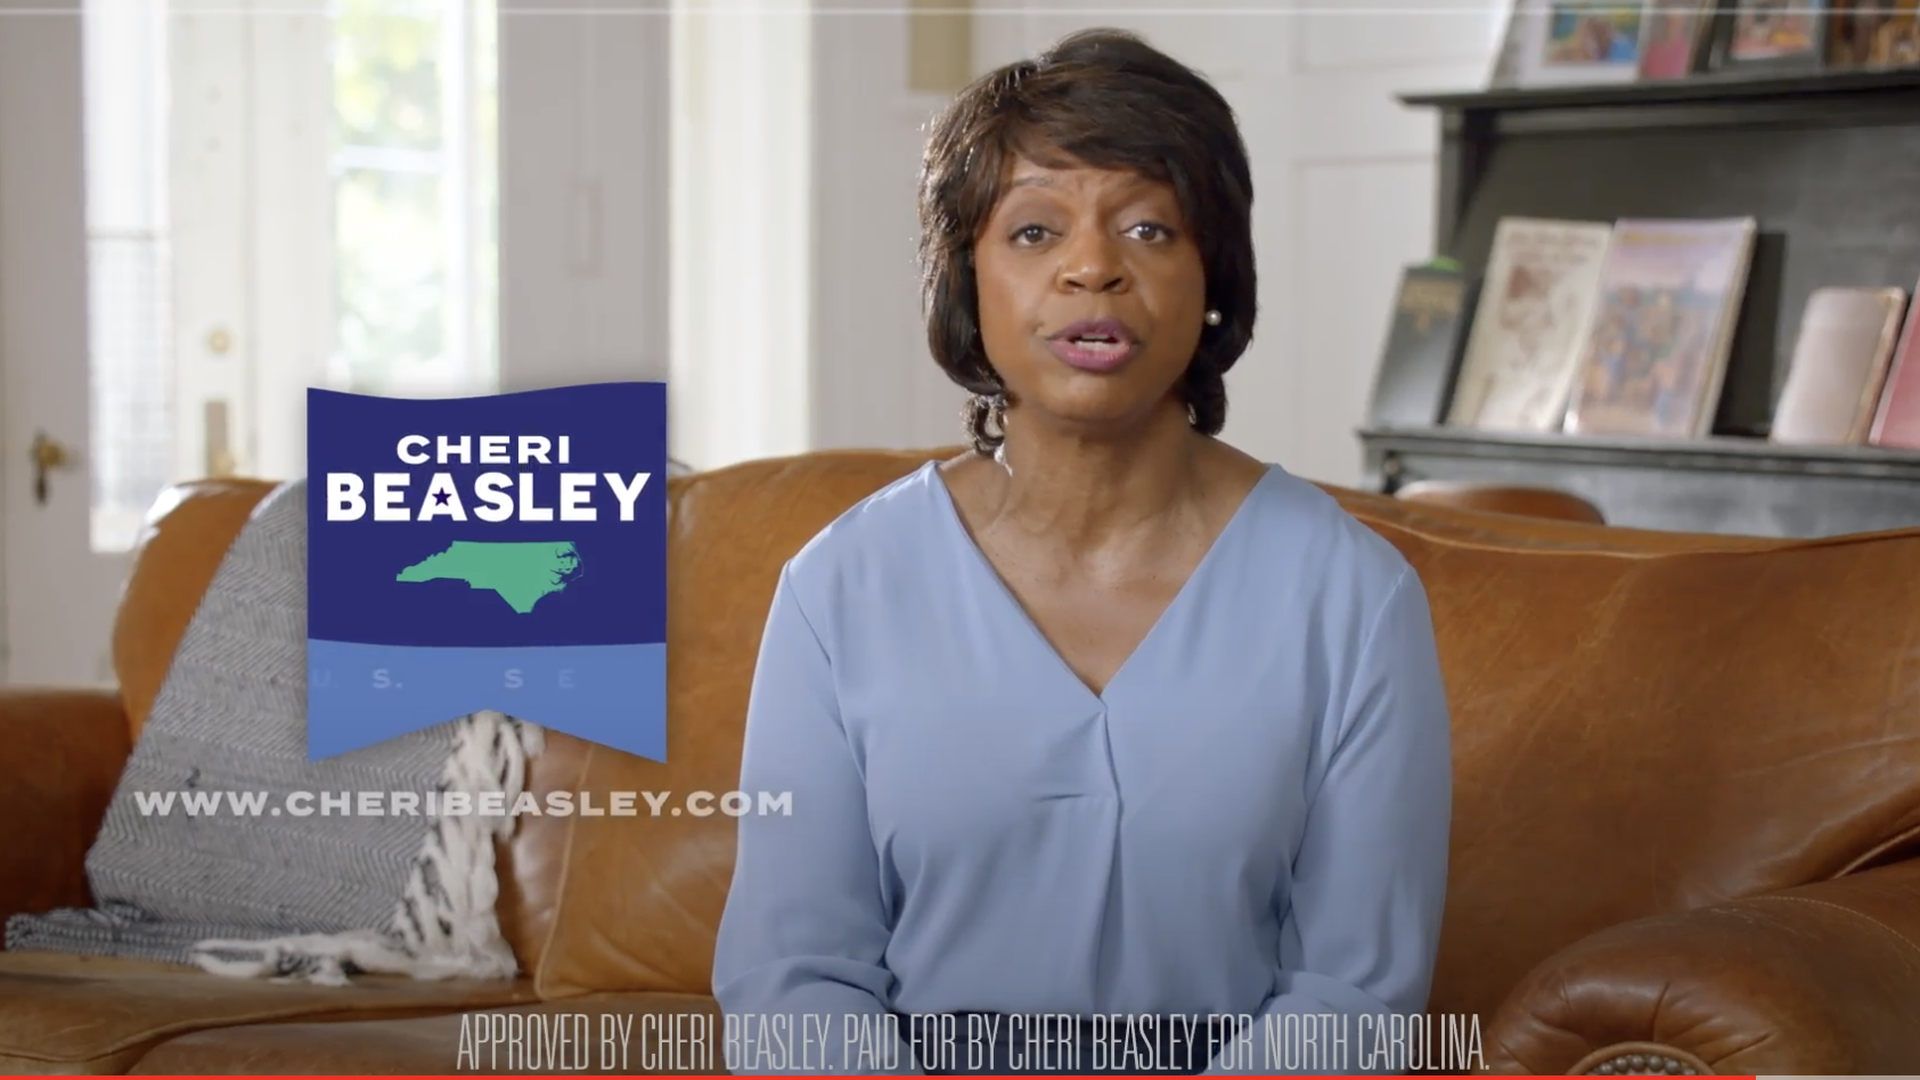 Cheri Beasley in a new campaign ad